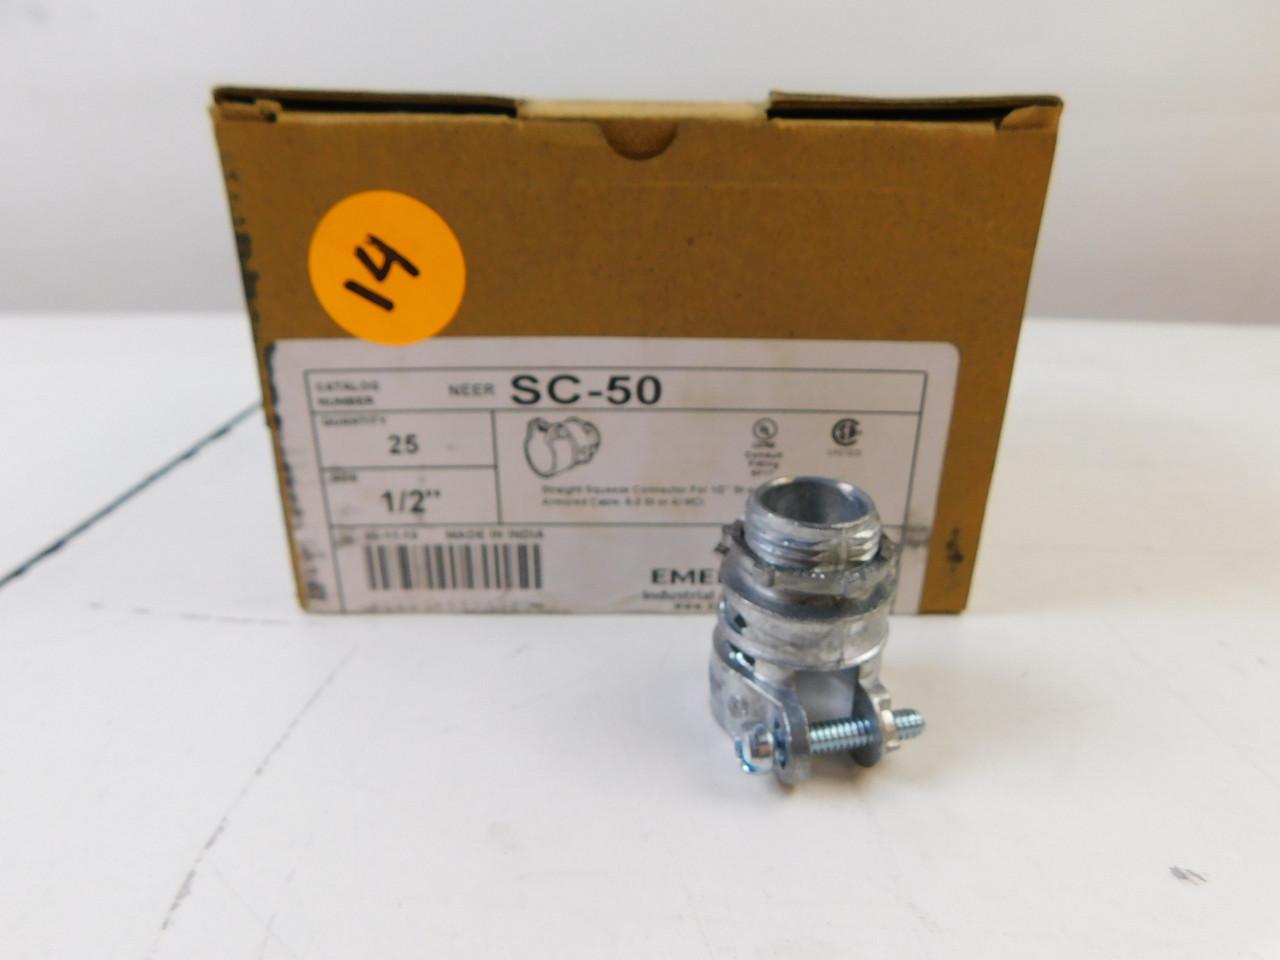 Emerson SC-50 1/2", 0.88 to 1" Cable, Die-Cast Zinc, Single Cable Opening, Squeeze, Straight, Flexible Cable and Conduit Connector with Locknut